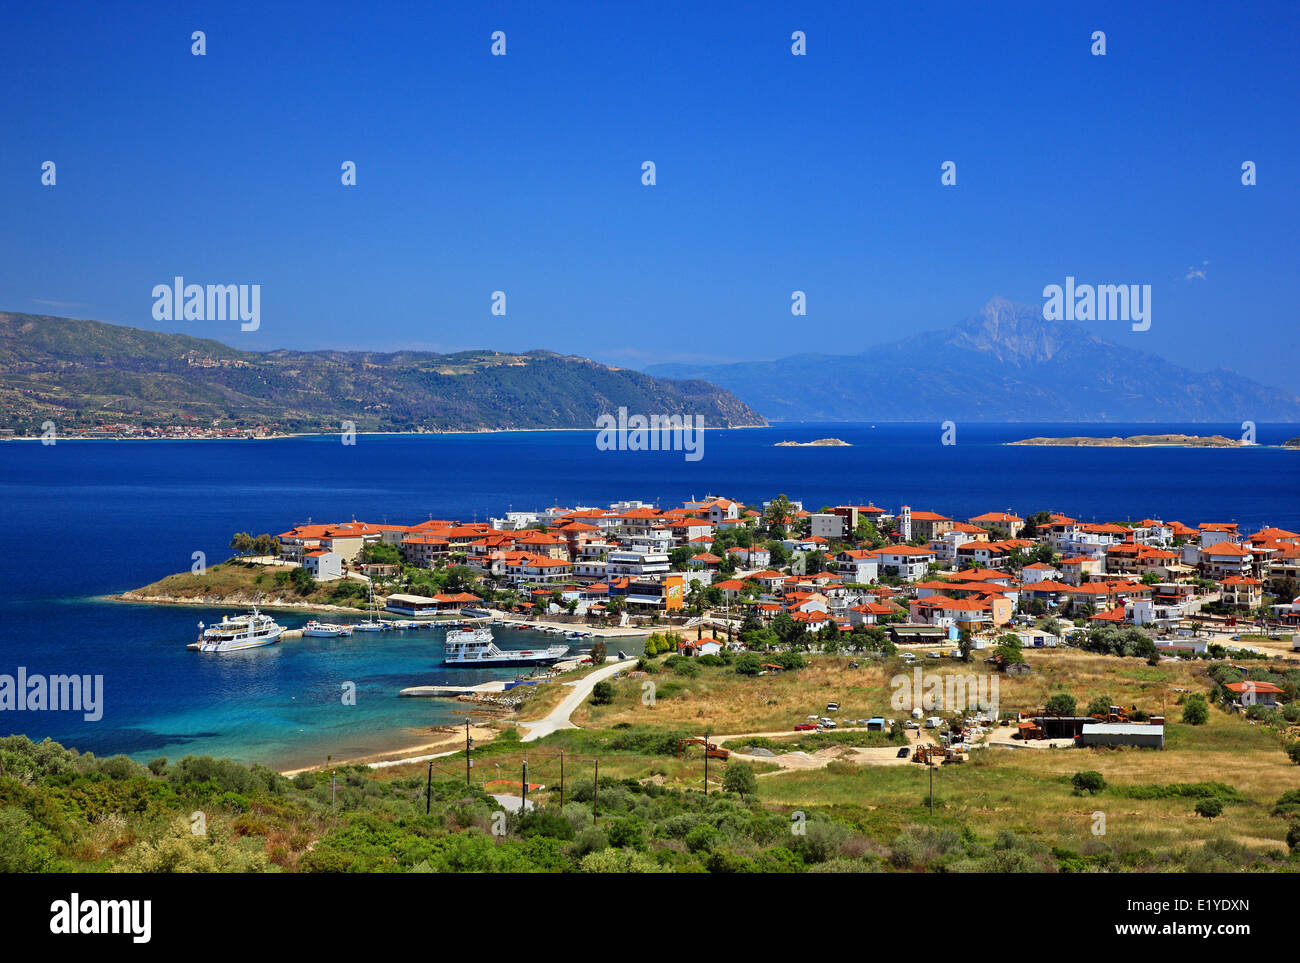 The village of Ammouliani island,  Halkidiki ('Chalkidiki'), Macedonia, Greece. In the background you can see Ouranoupolis. Stock Photo